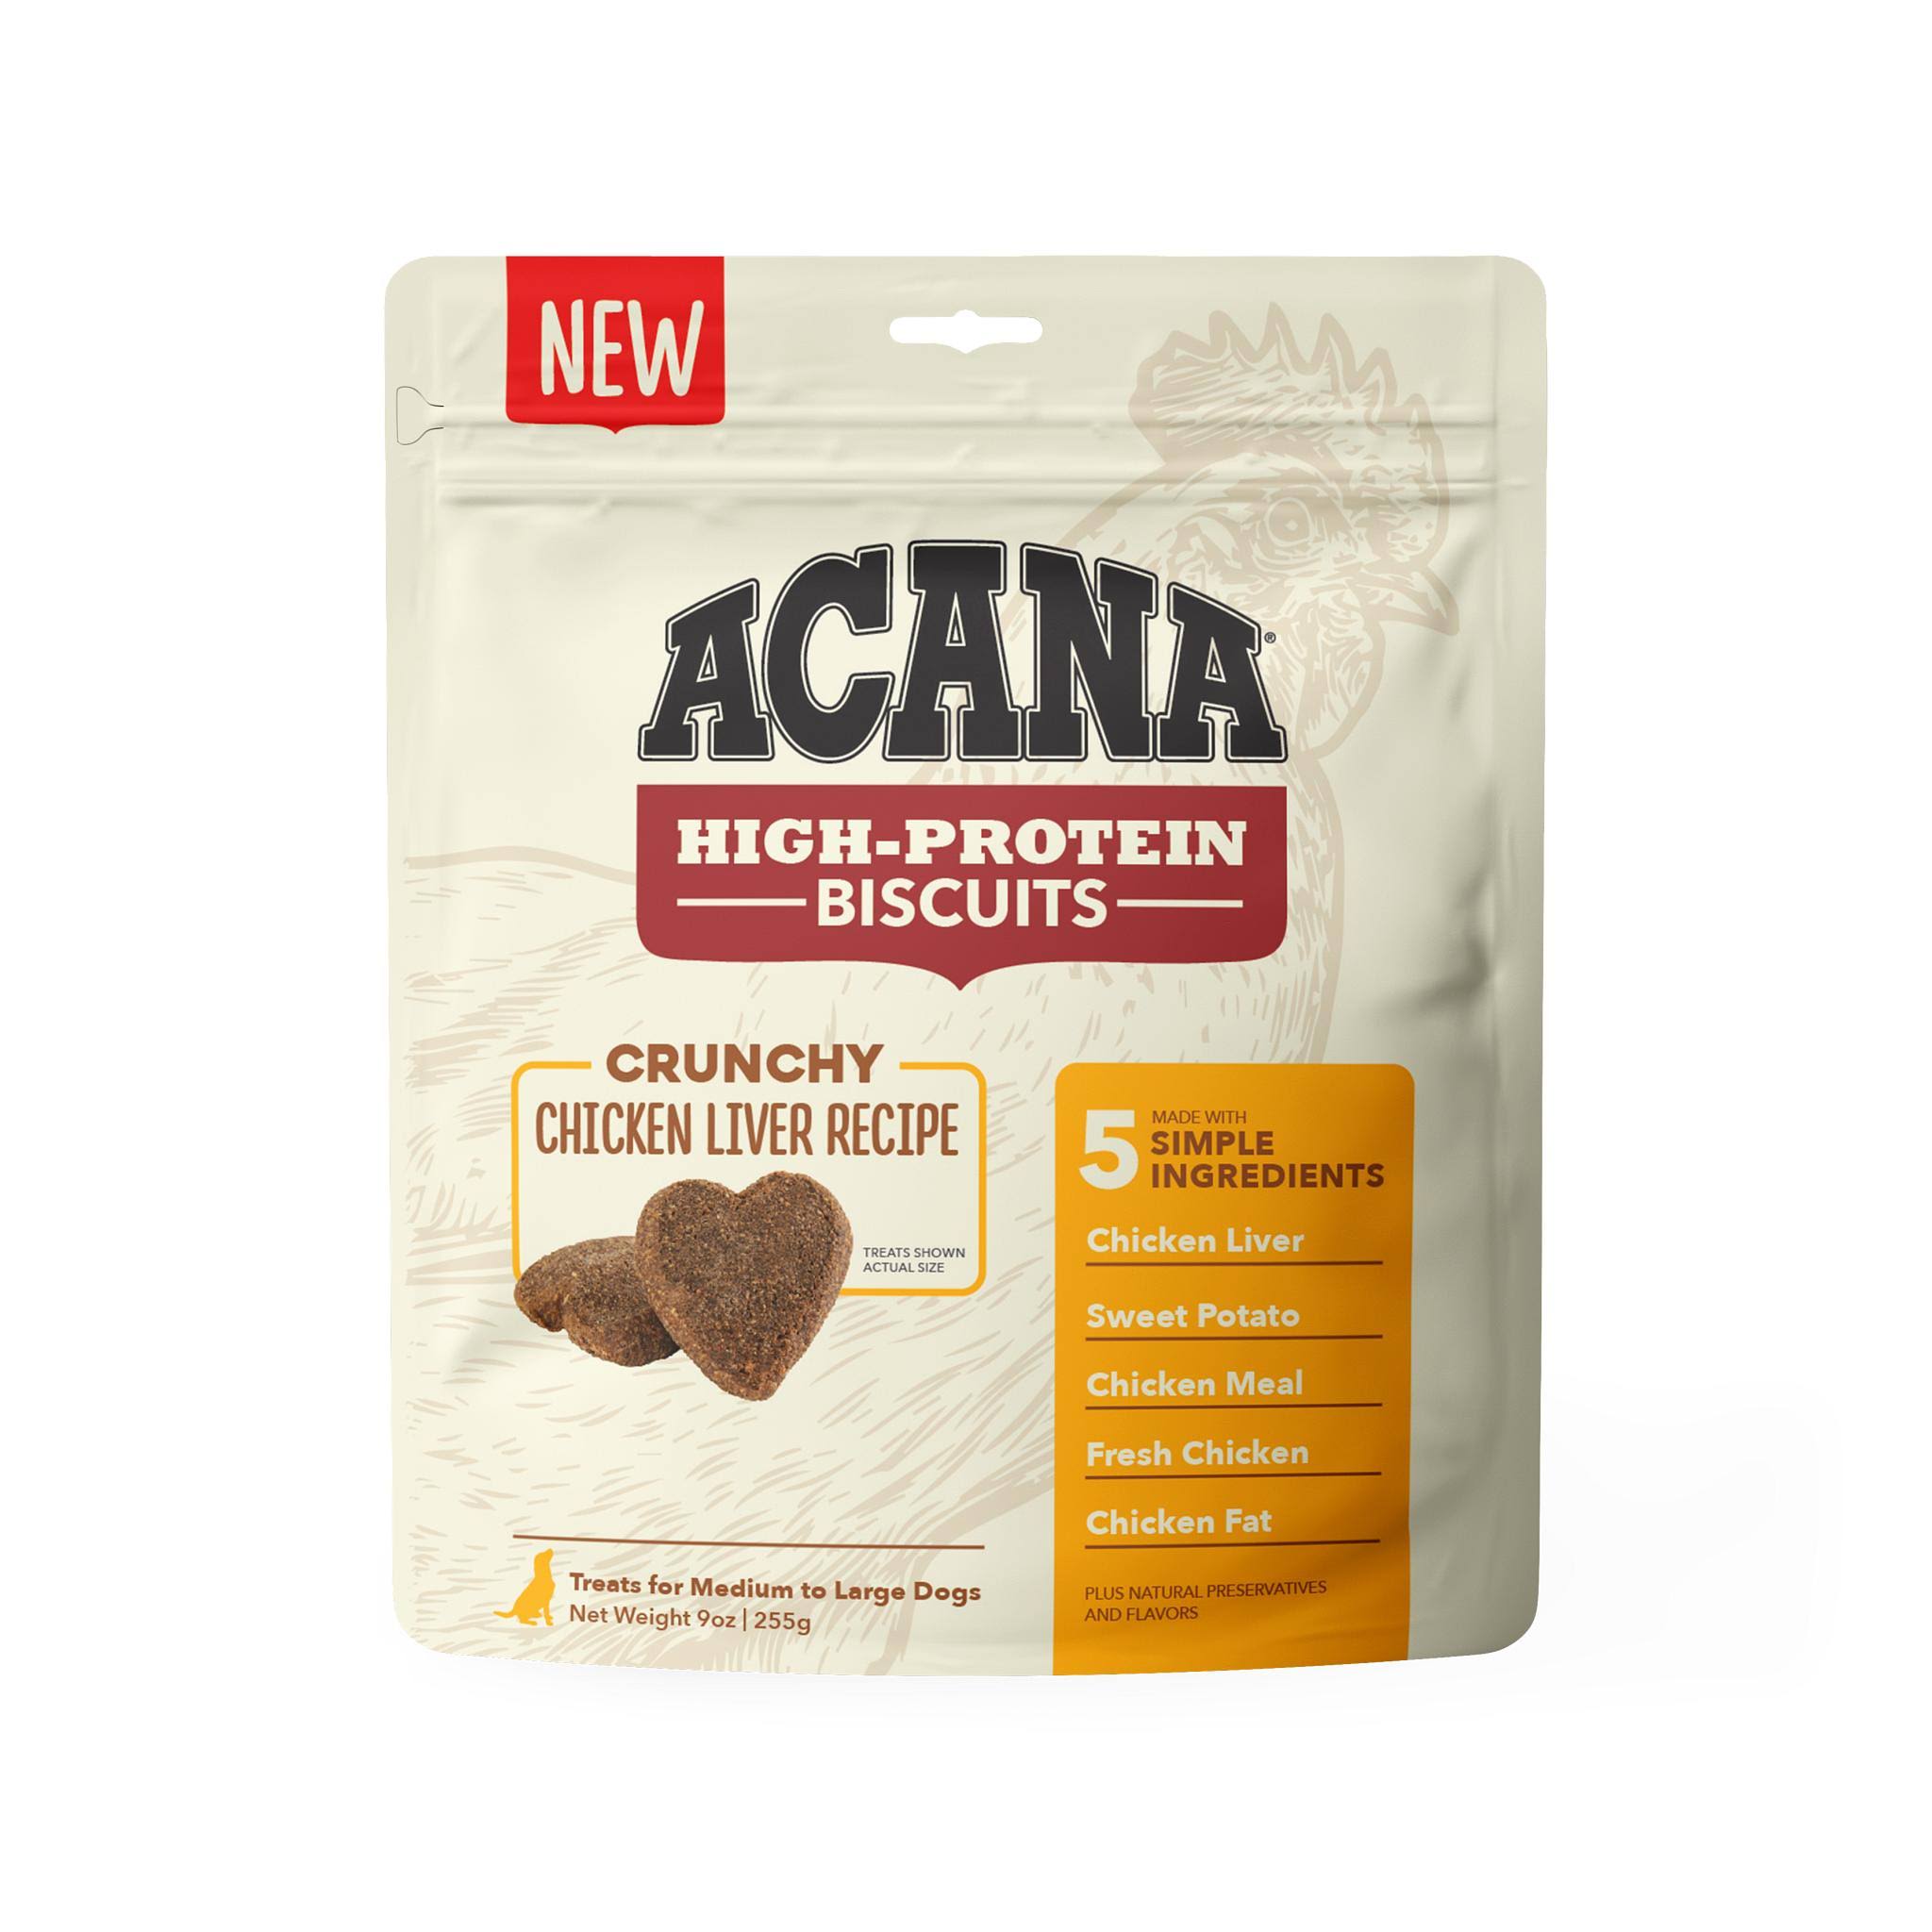 Acana Crunchy Biscuits Dog, High Protein, Treats Chicken Liver Recipe, Large - 9 oz